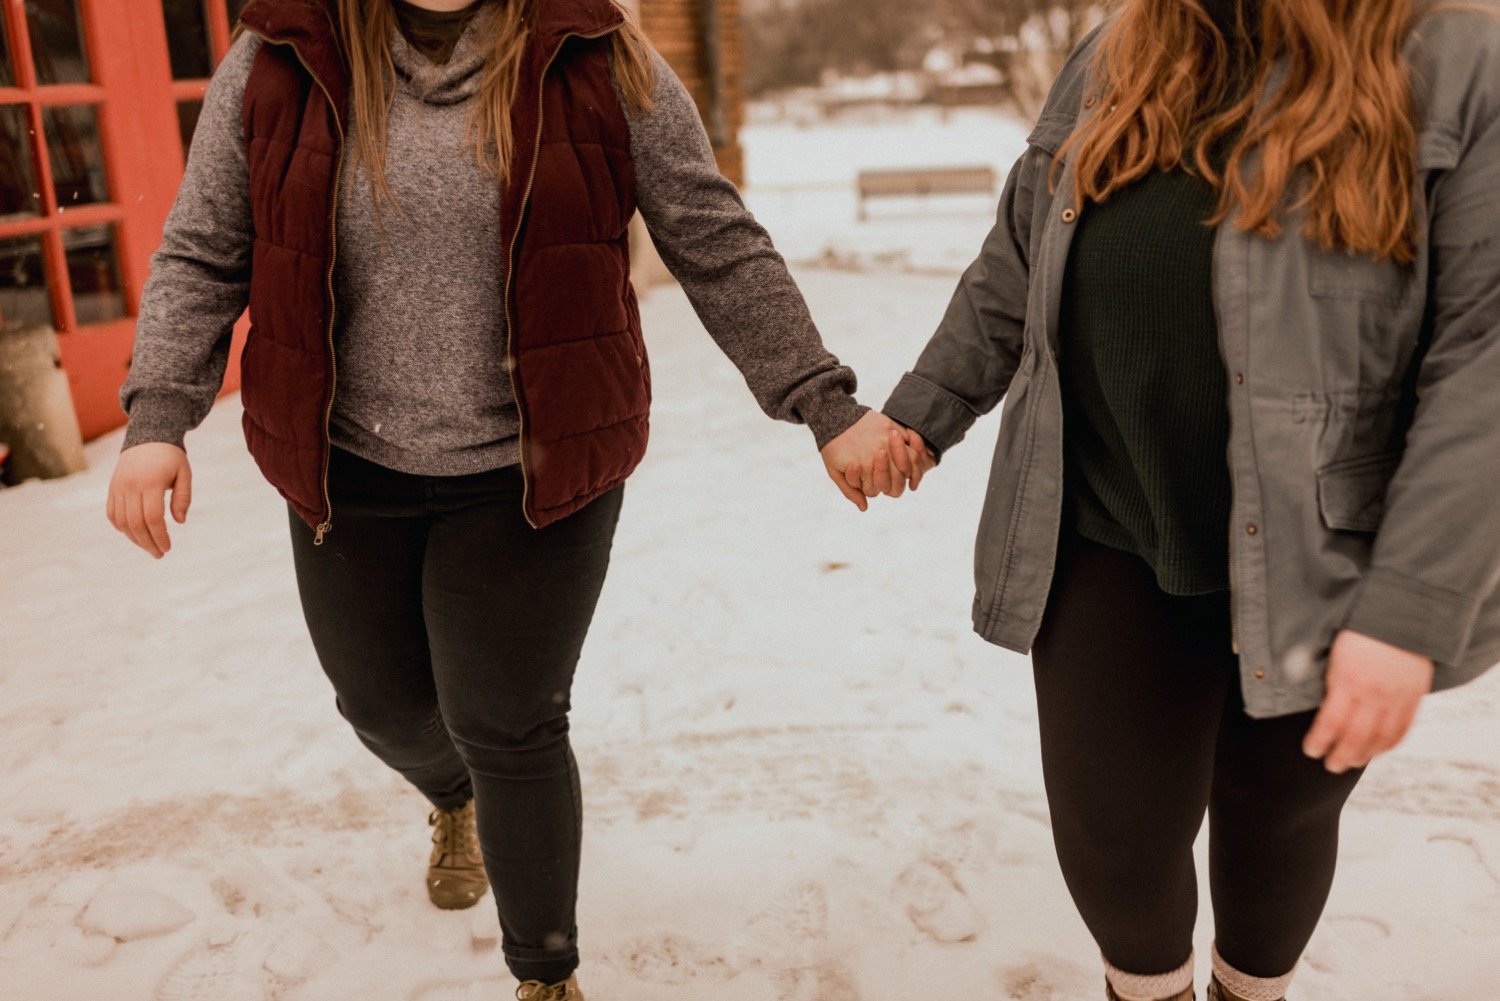 Couple-holds-hands-while-walking-through-the-snow.jpg.jpg